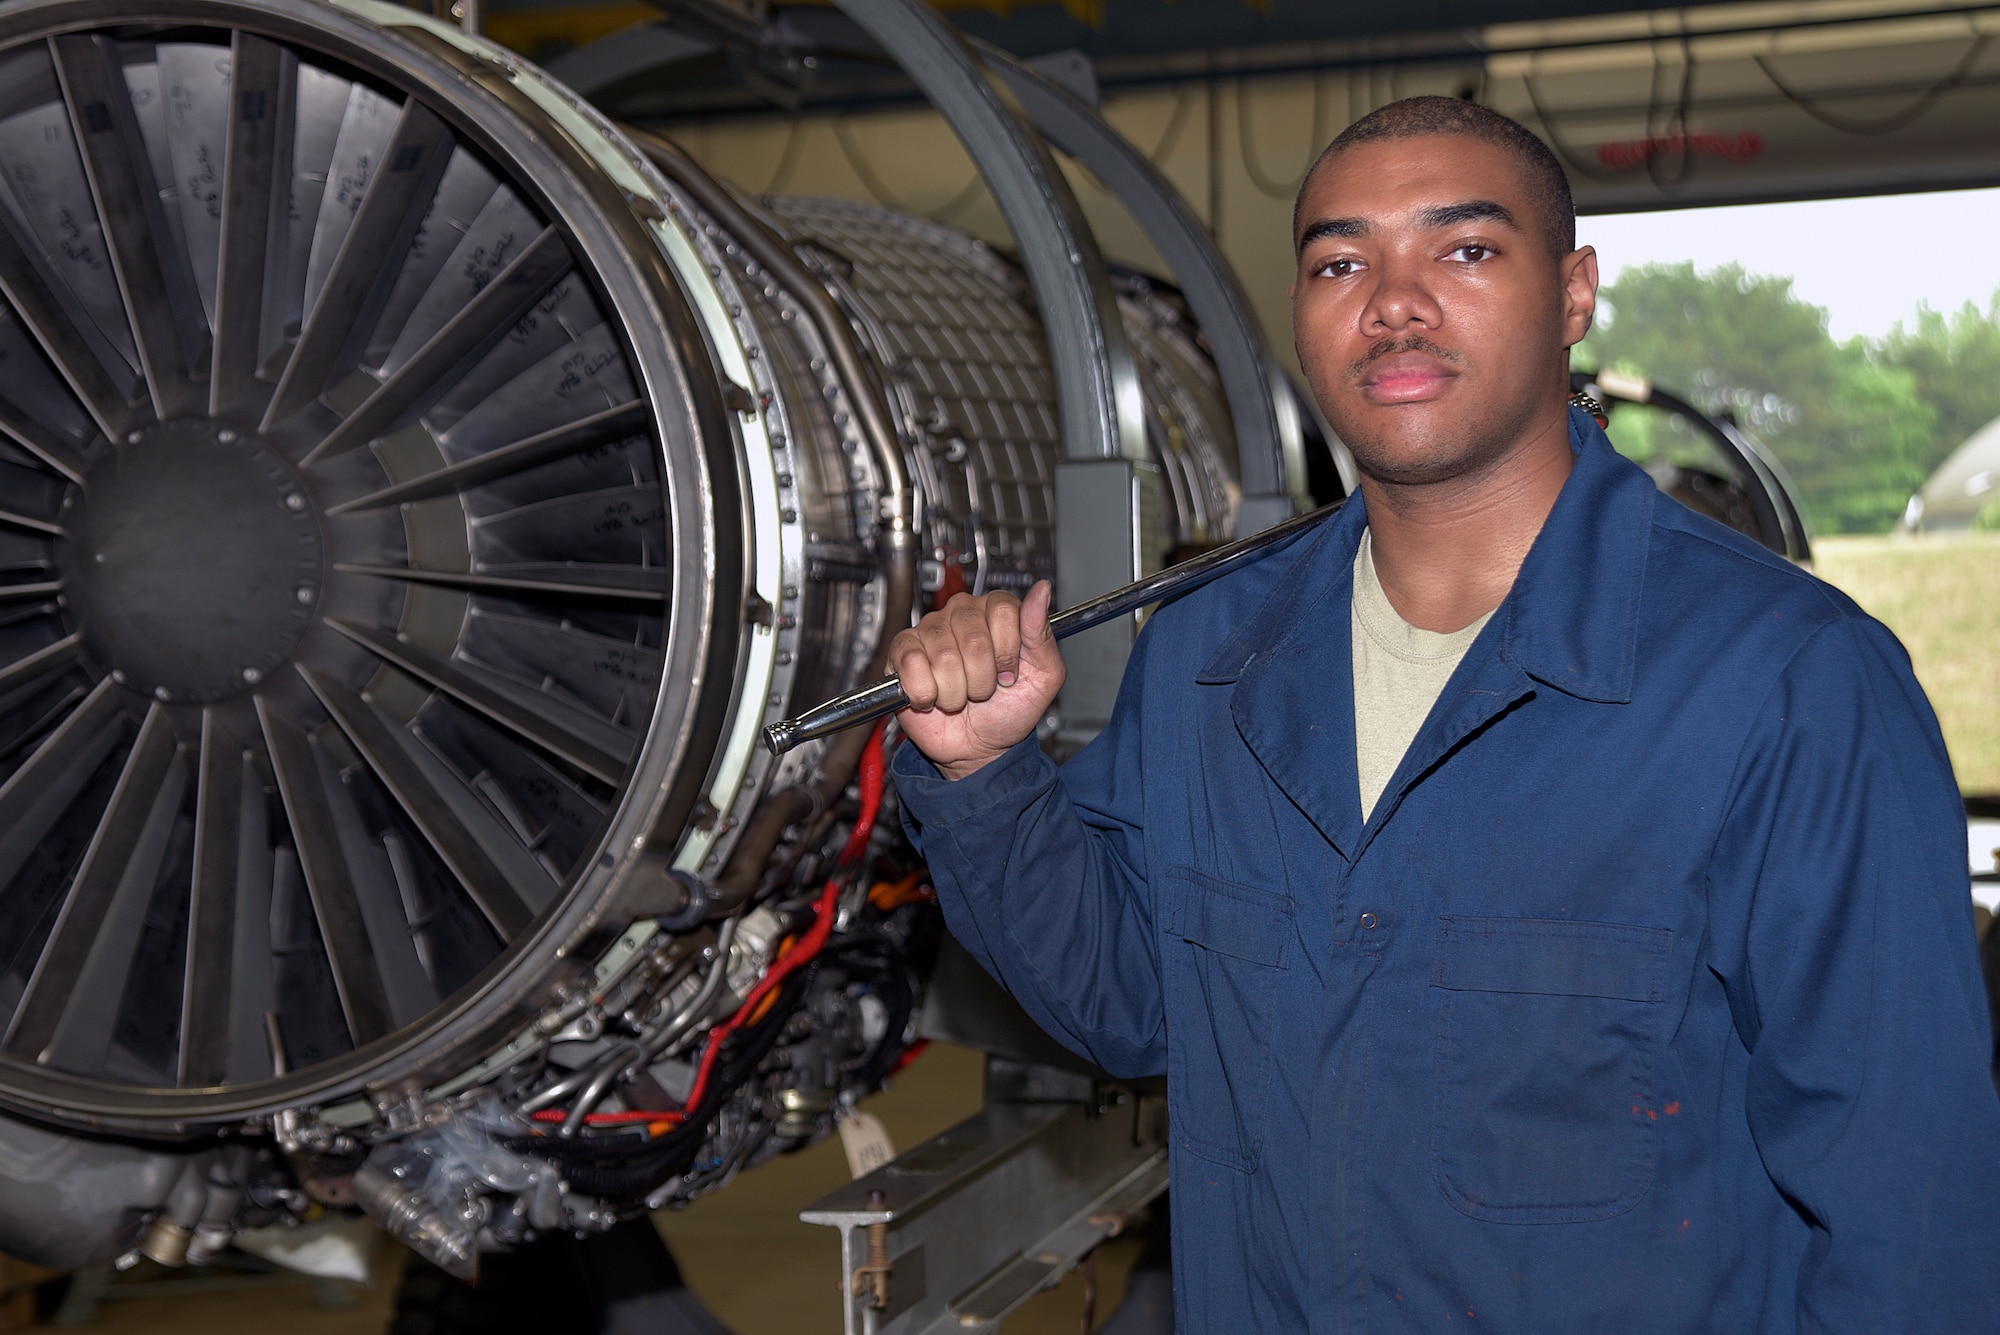 U.S. Air Force Airman 1st Class Adelbert Molyneaux, 35th Maintenance Squadron aerospace propulsion apprentice, stands next to an F-16 Fighting Falcon engine at Misawa Air Base, Japan, June 9, 2015. Fix and maintain F110-GE-100/-129 engines in the Pacific Air Force’s only centralized repair facility that directly supports 3 combat fighter wings. (U.S. Air Force photo by Senior Airman Jose L. Hernandez-Domitilo)